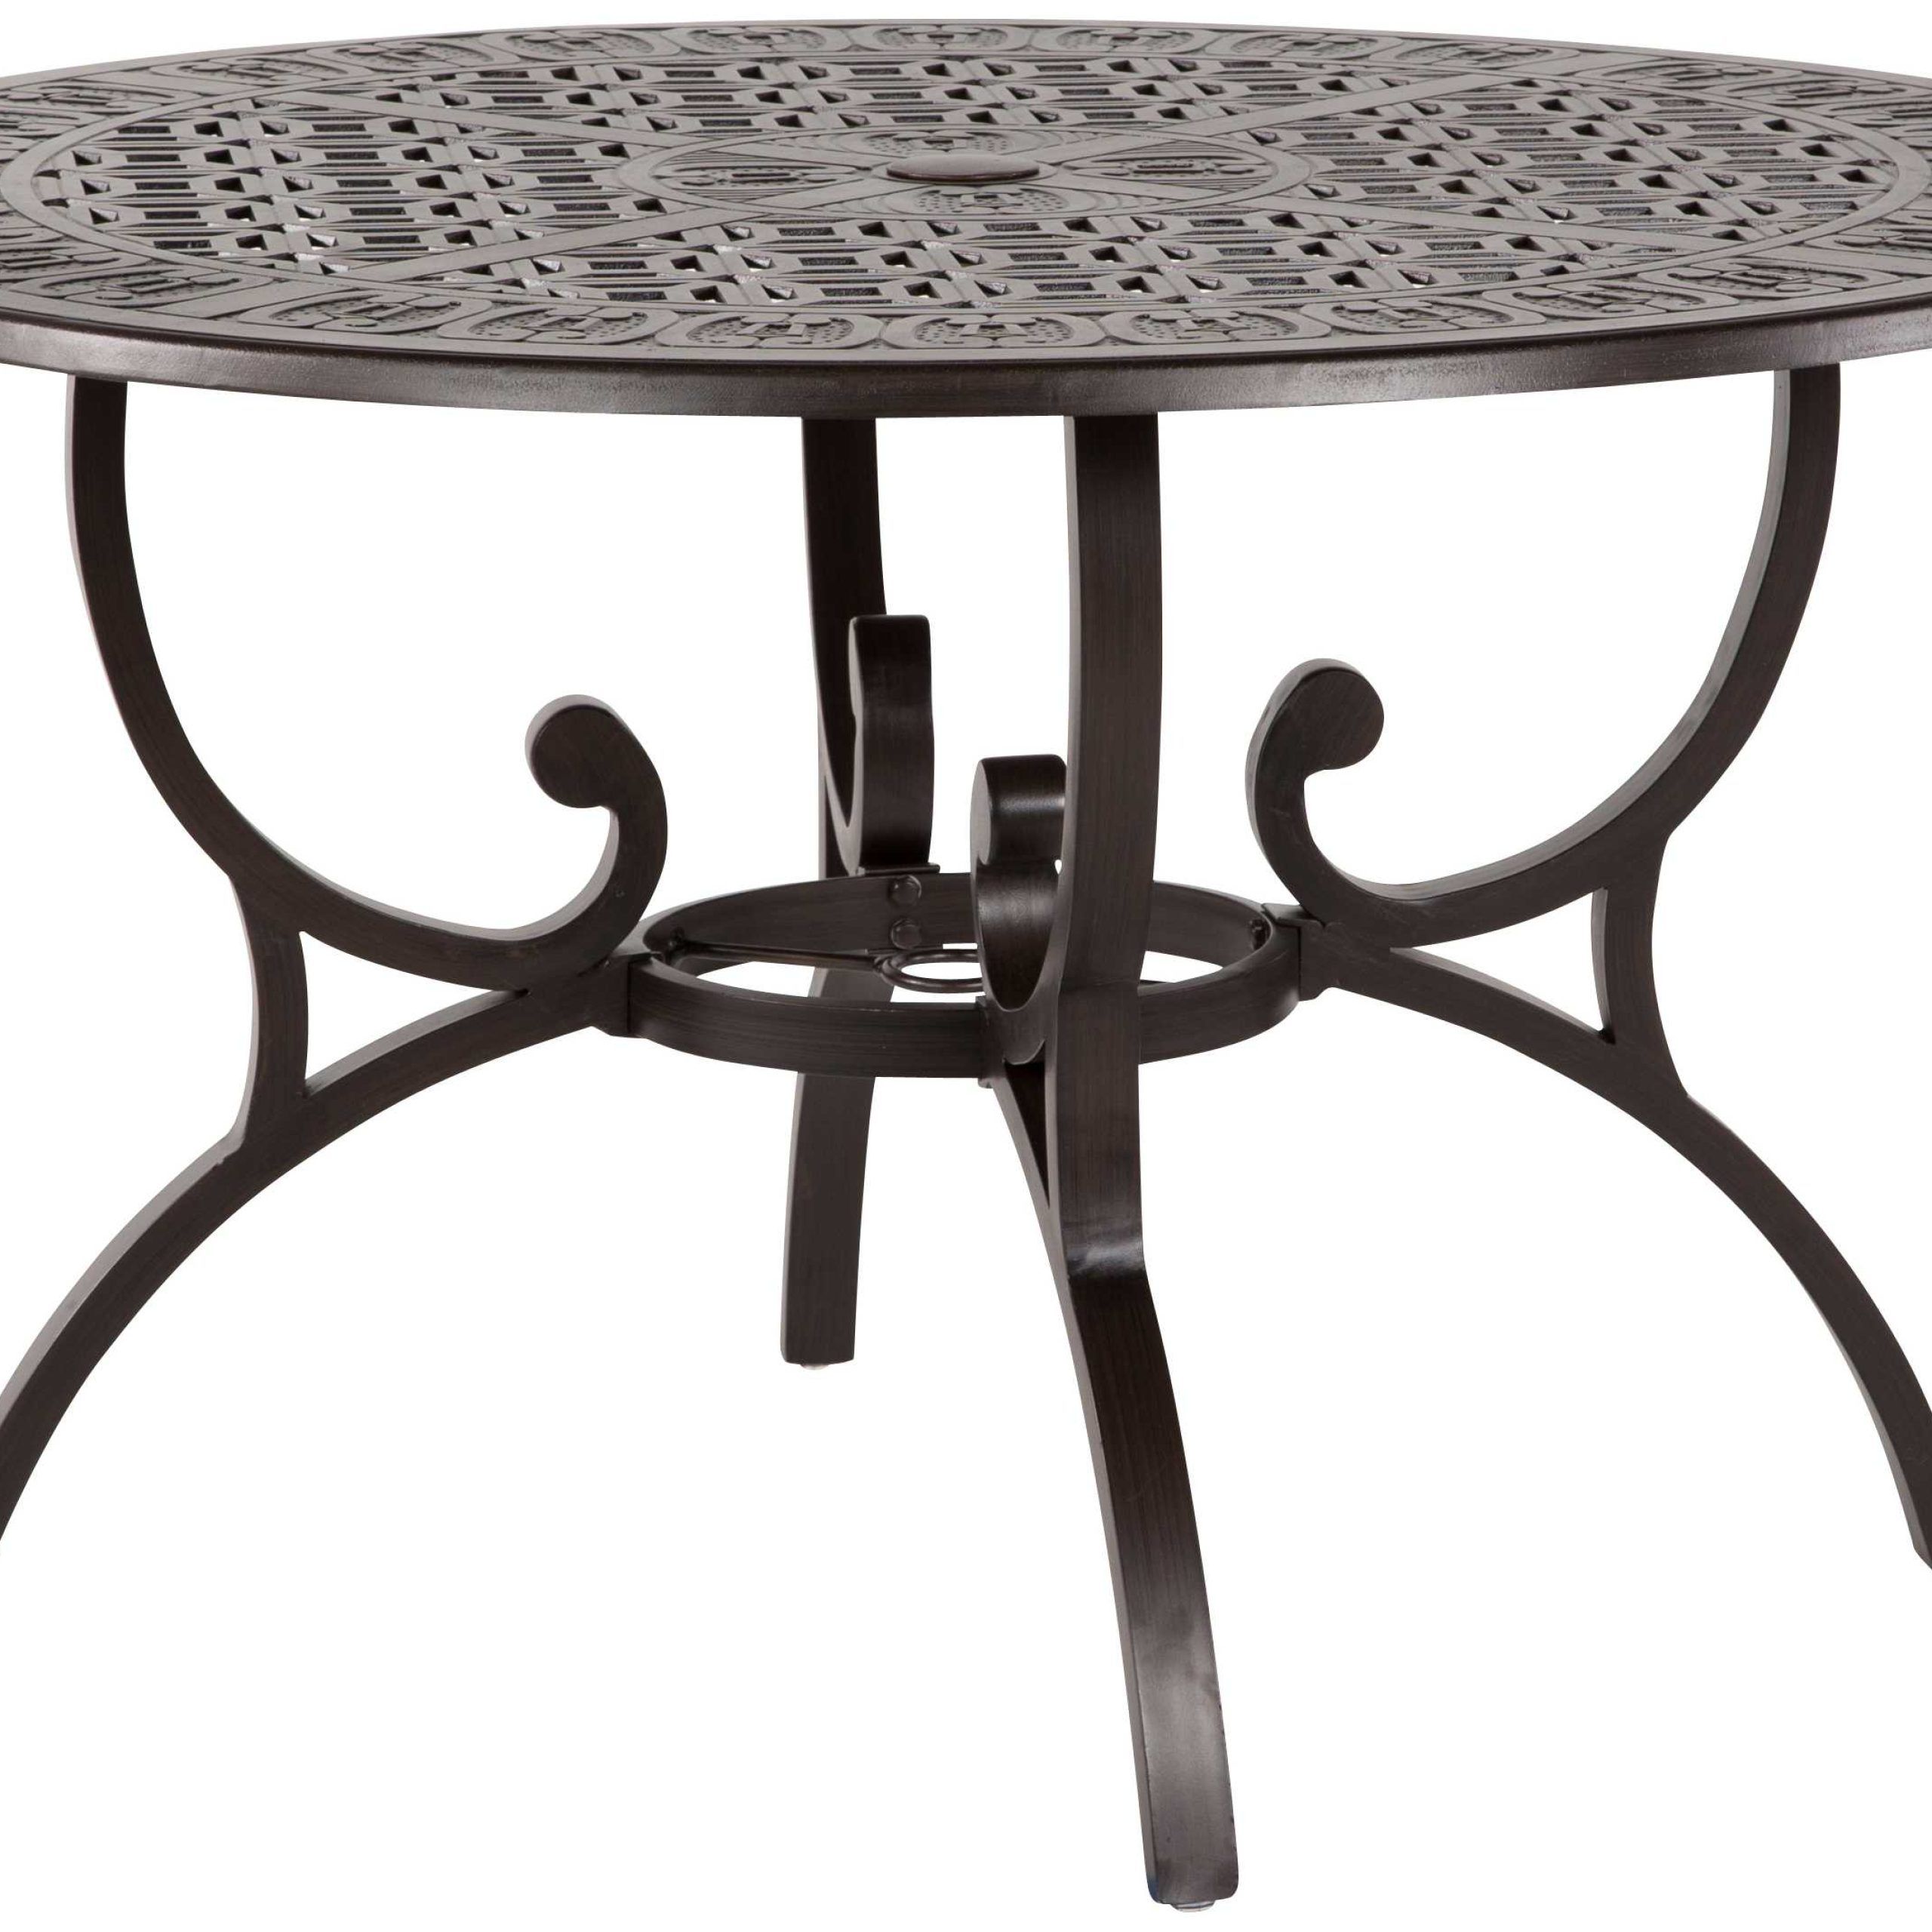 Round Black Patio Coffee Table : Polywood Round Outdoor Coffee Table 38 For Round Steel Patio Coffee Tables (Gallery 20 of 20)